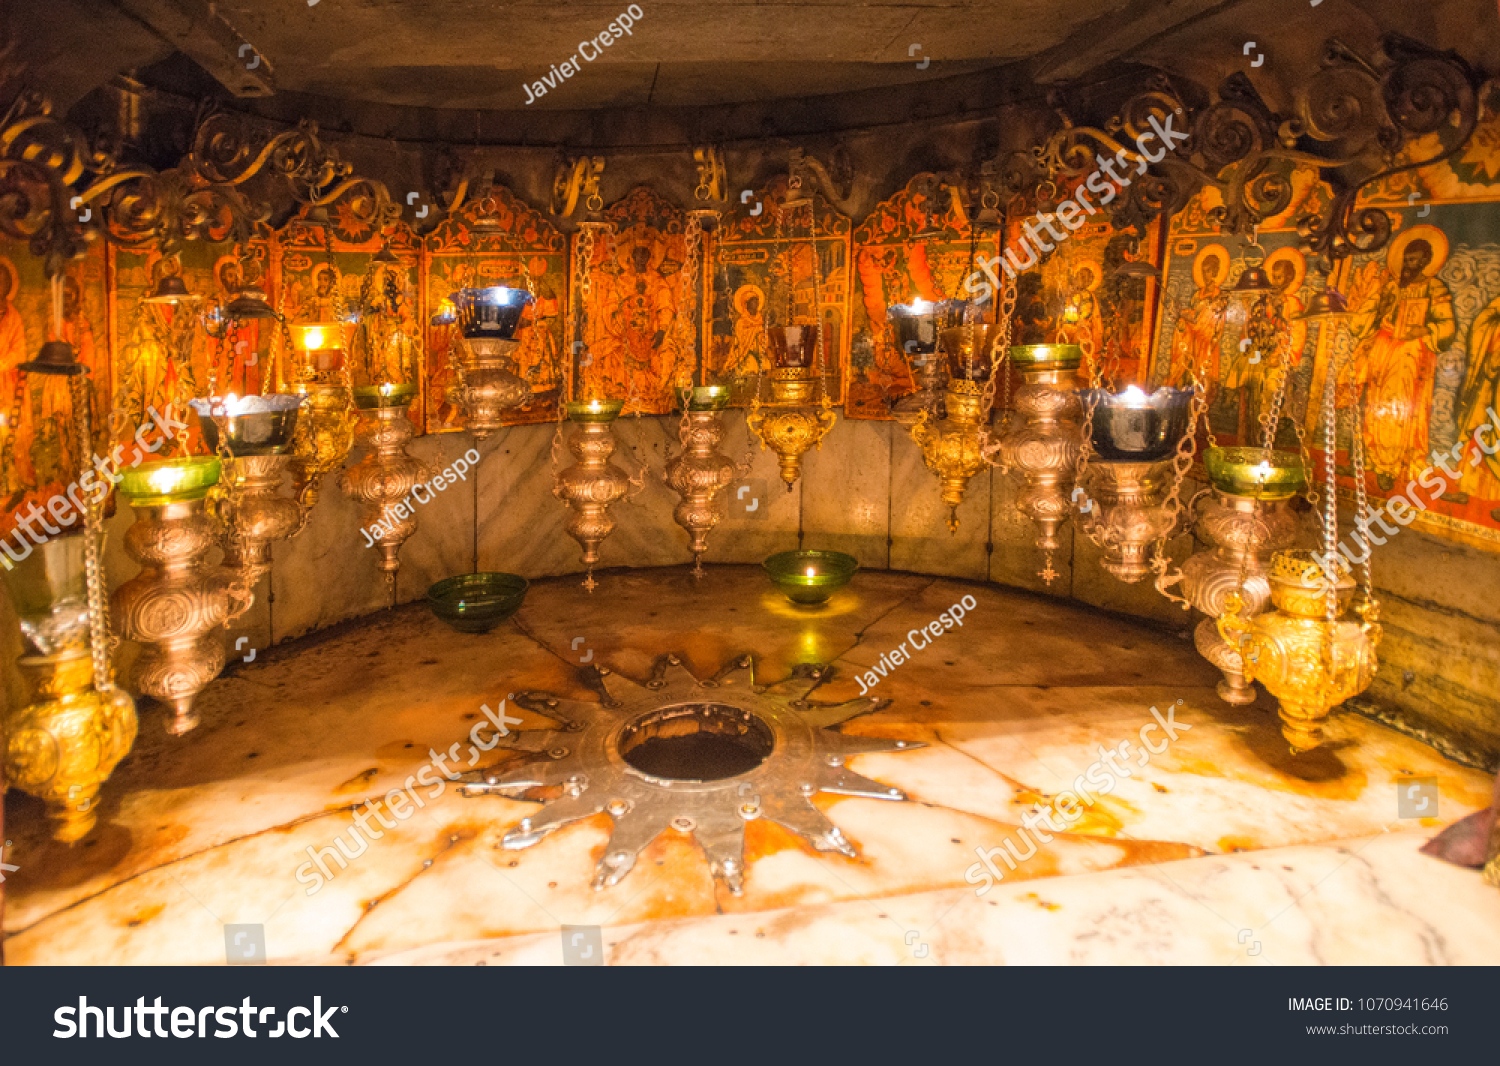 Grotto of the Nativity of Jesus #1070941646